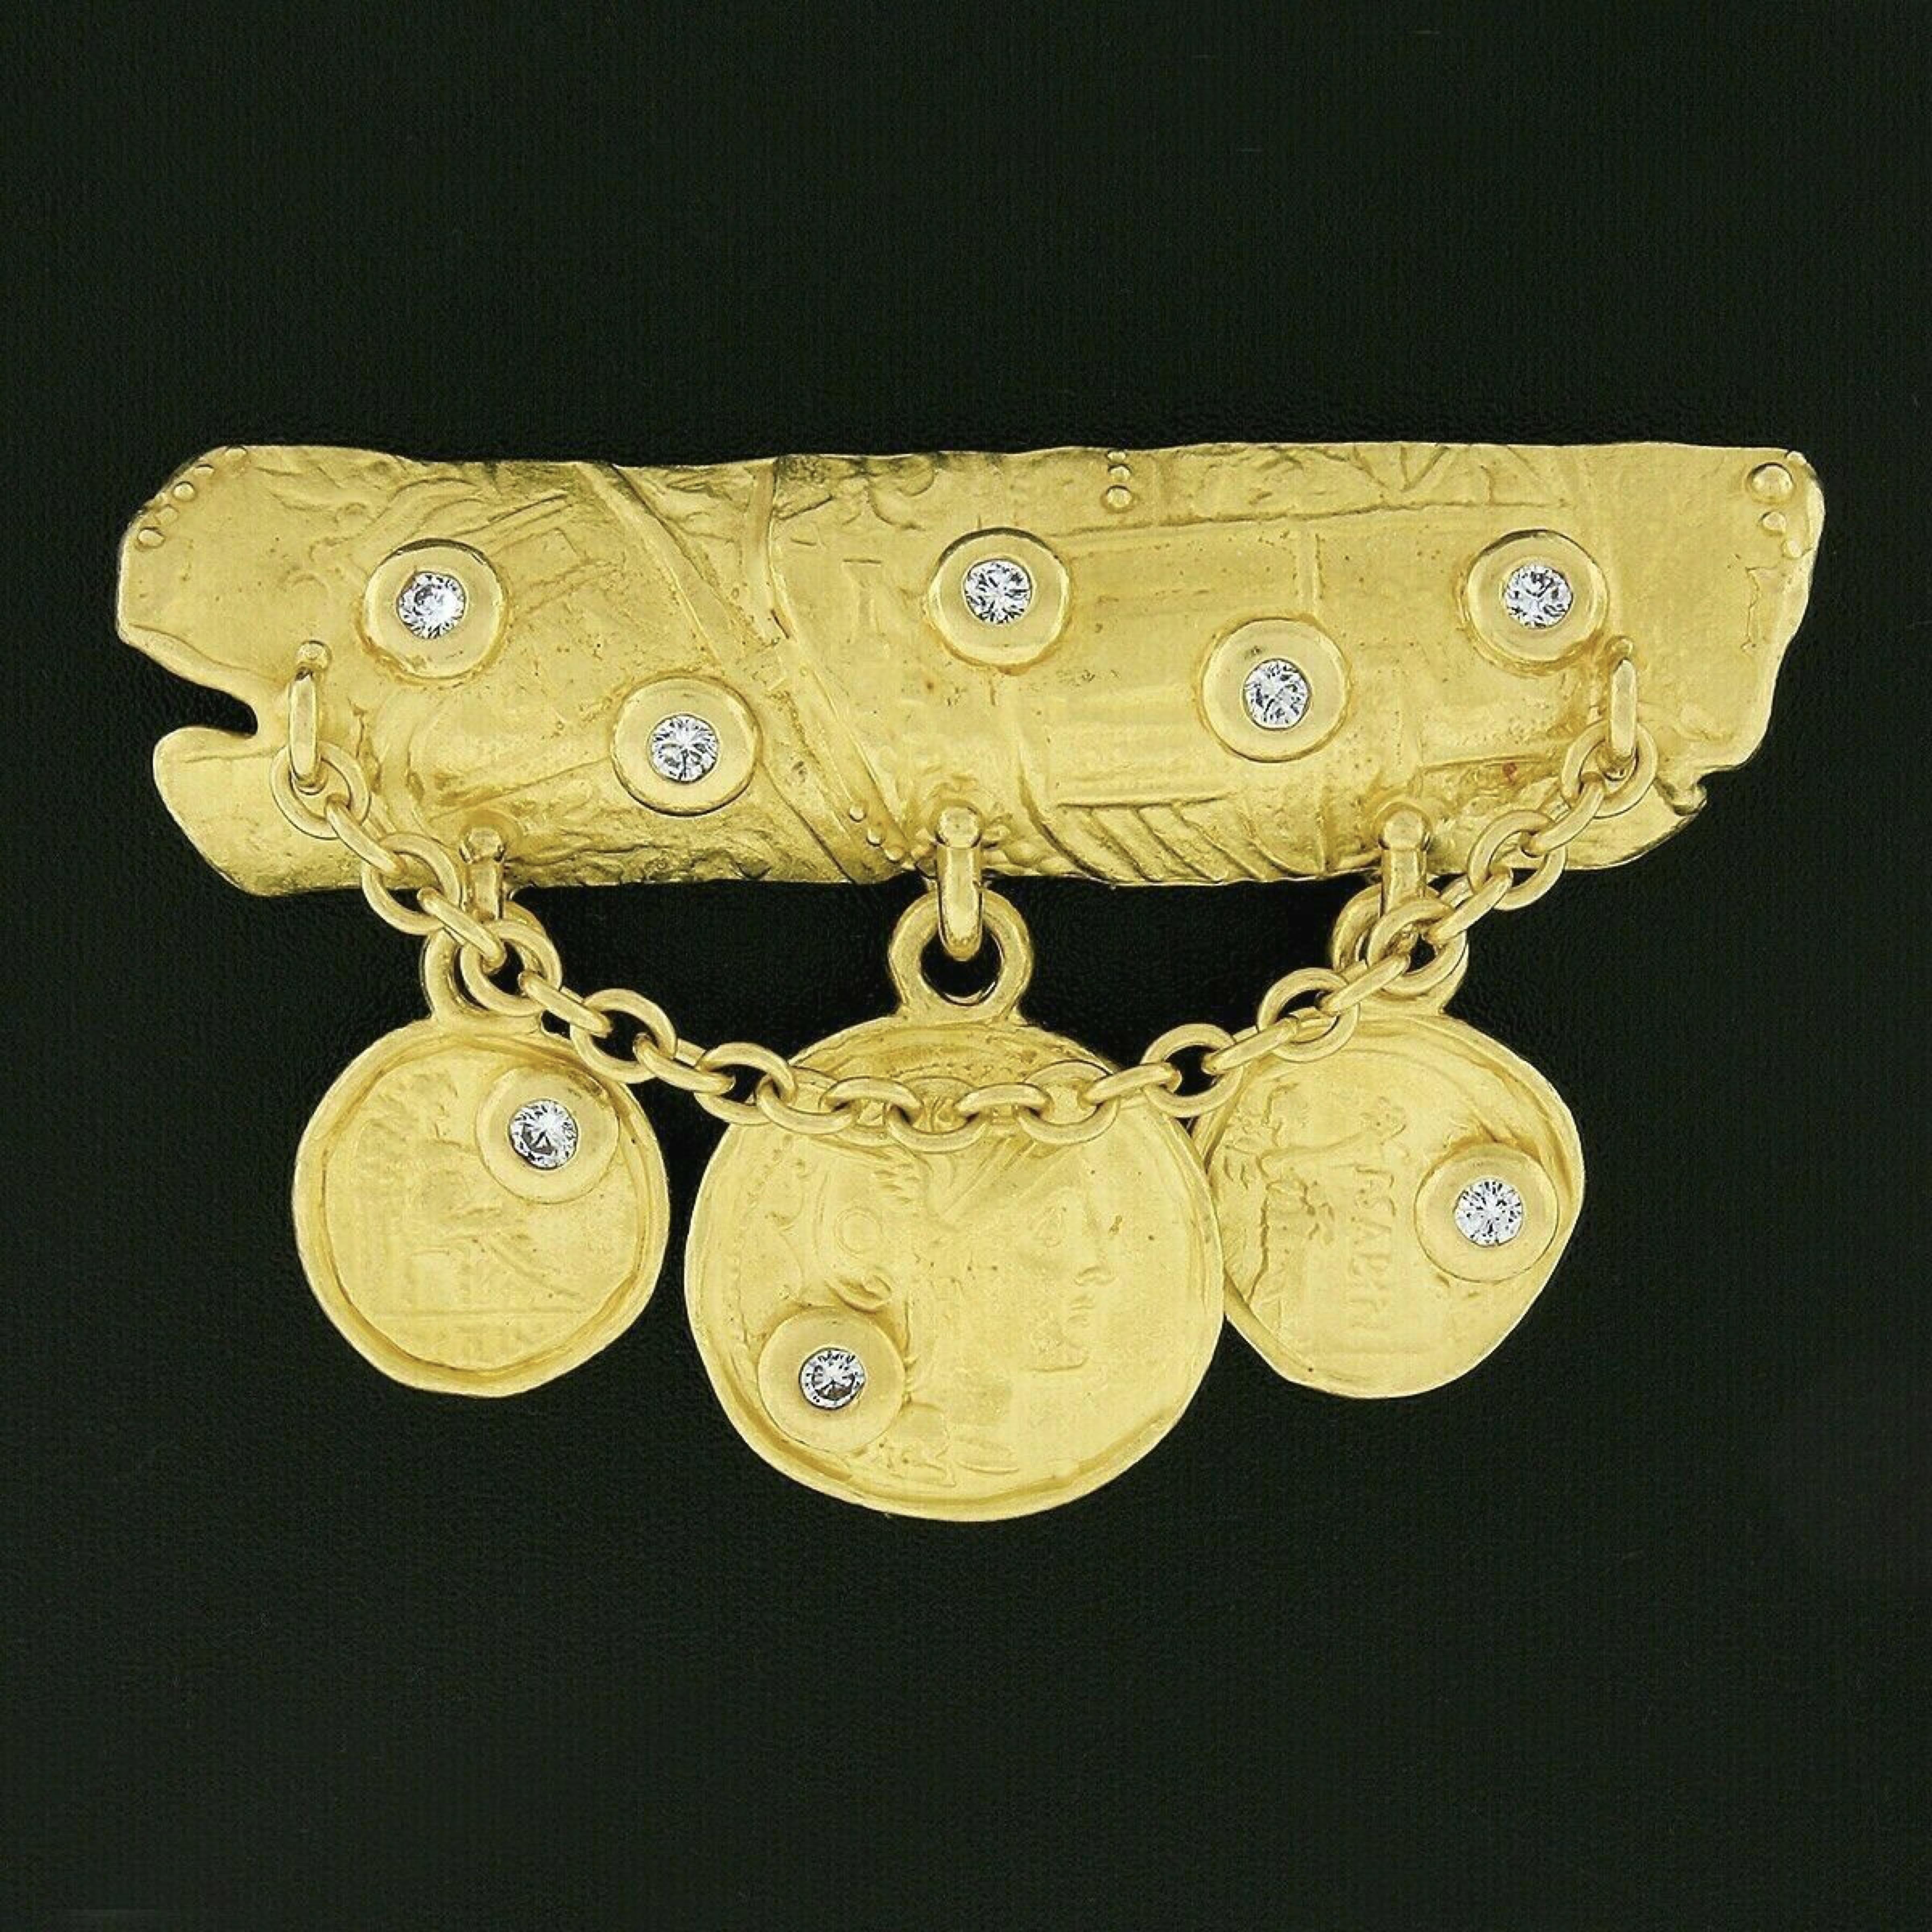 Here we have a magnificent pin brooch designed by Denise Roberge that is crafted in solid 22k yellow gold. It features a bold domed bar at its top part adorned with a cable chain and three detailed ancient coins gently dangling below, with